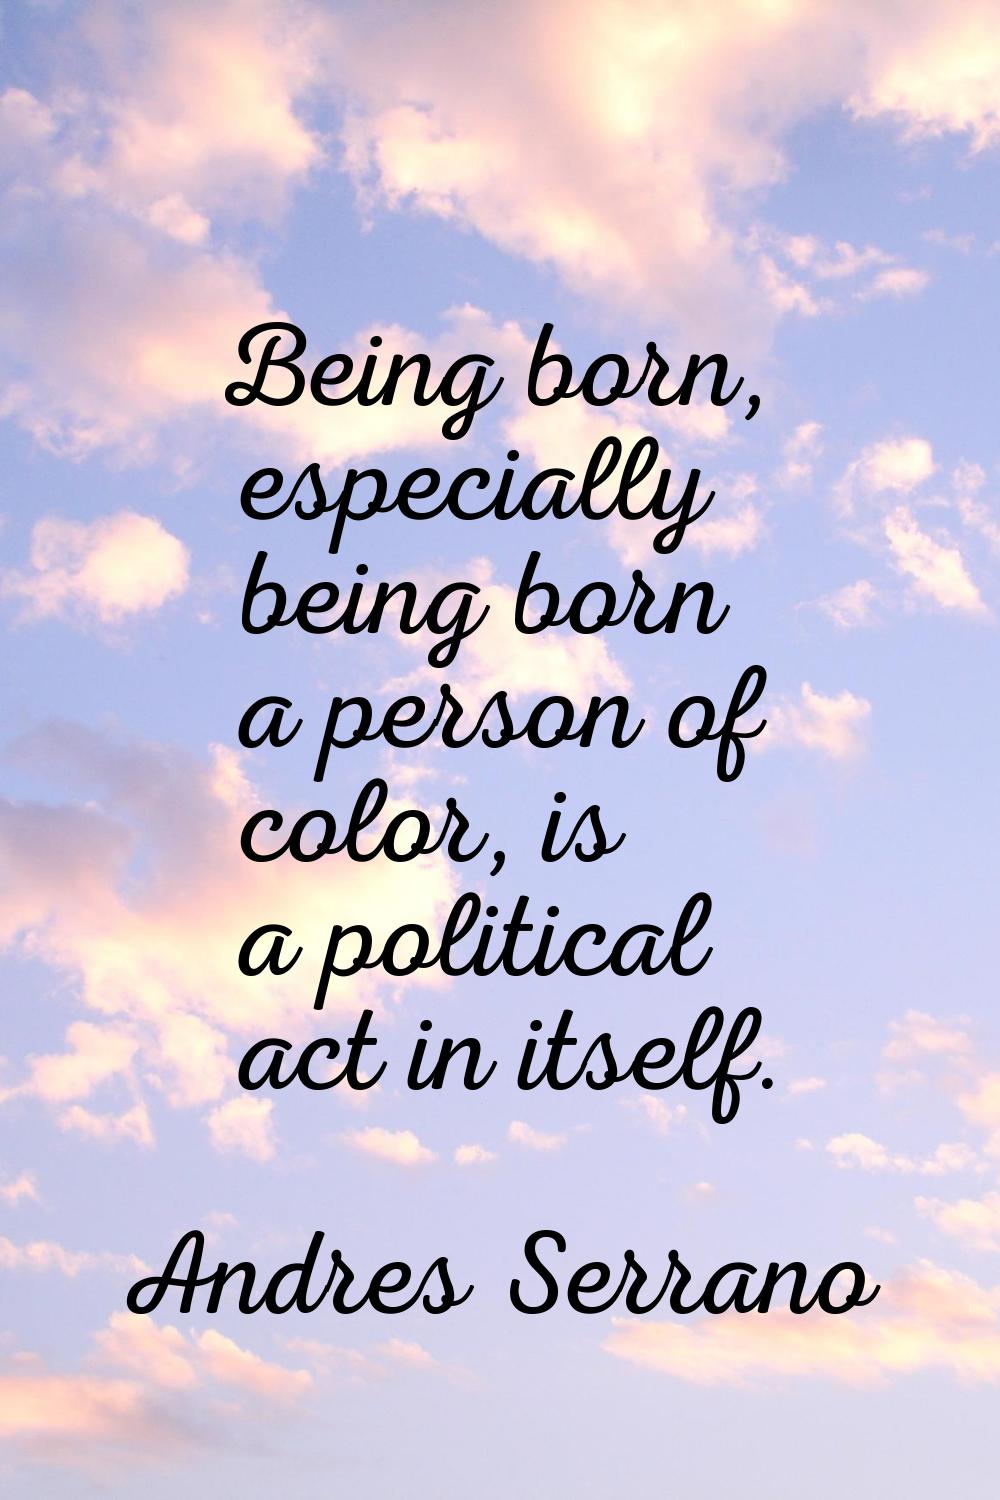 Being born, especially being born a person of color, is a political act in itself.